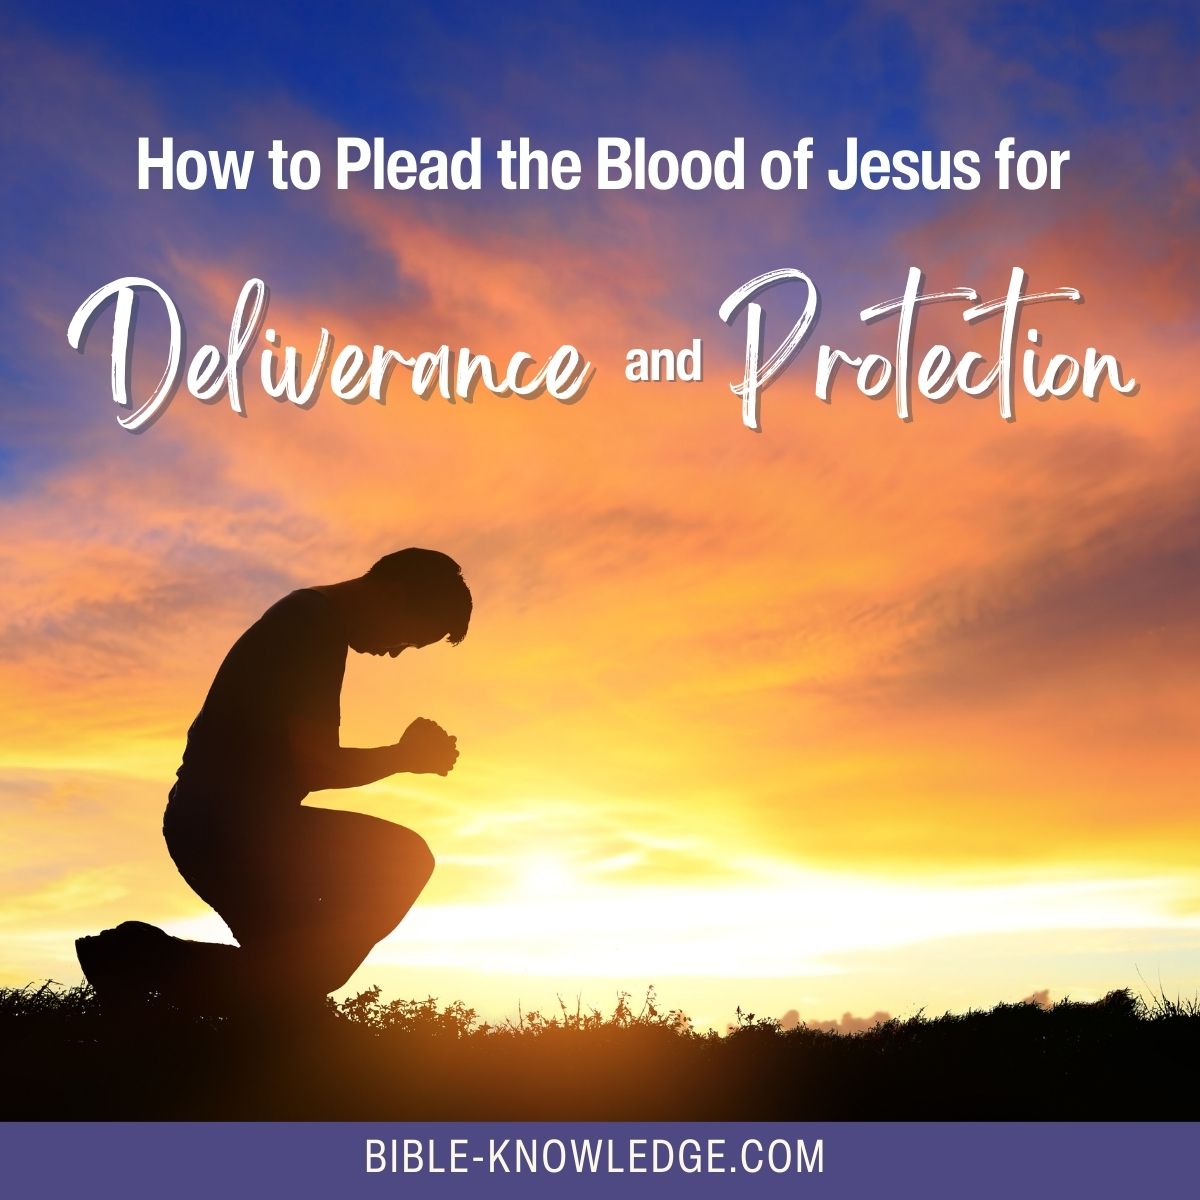 How to Plead the Blood of Jesus for Deliverance and Protection